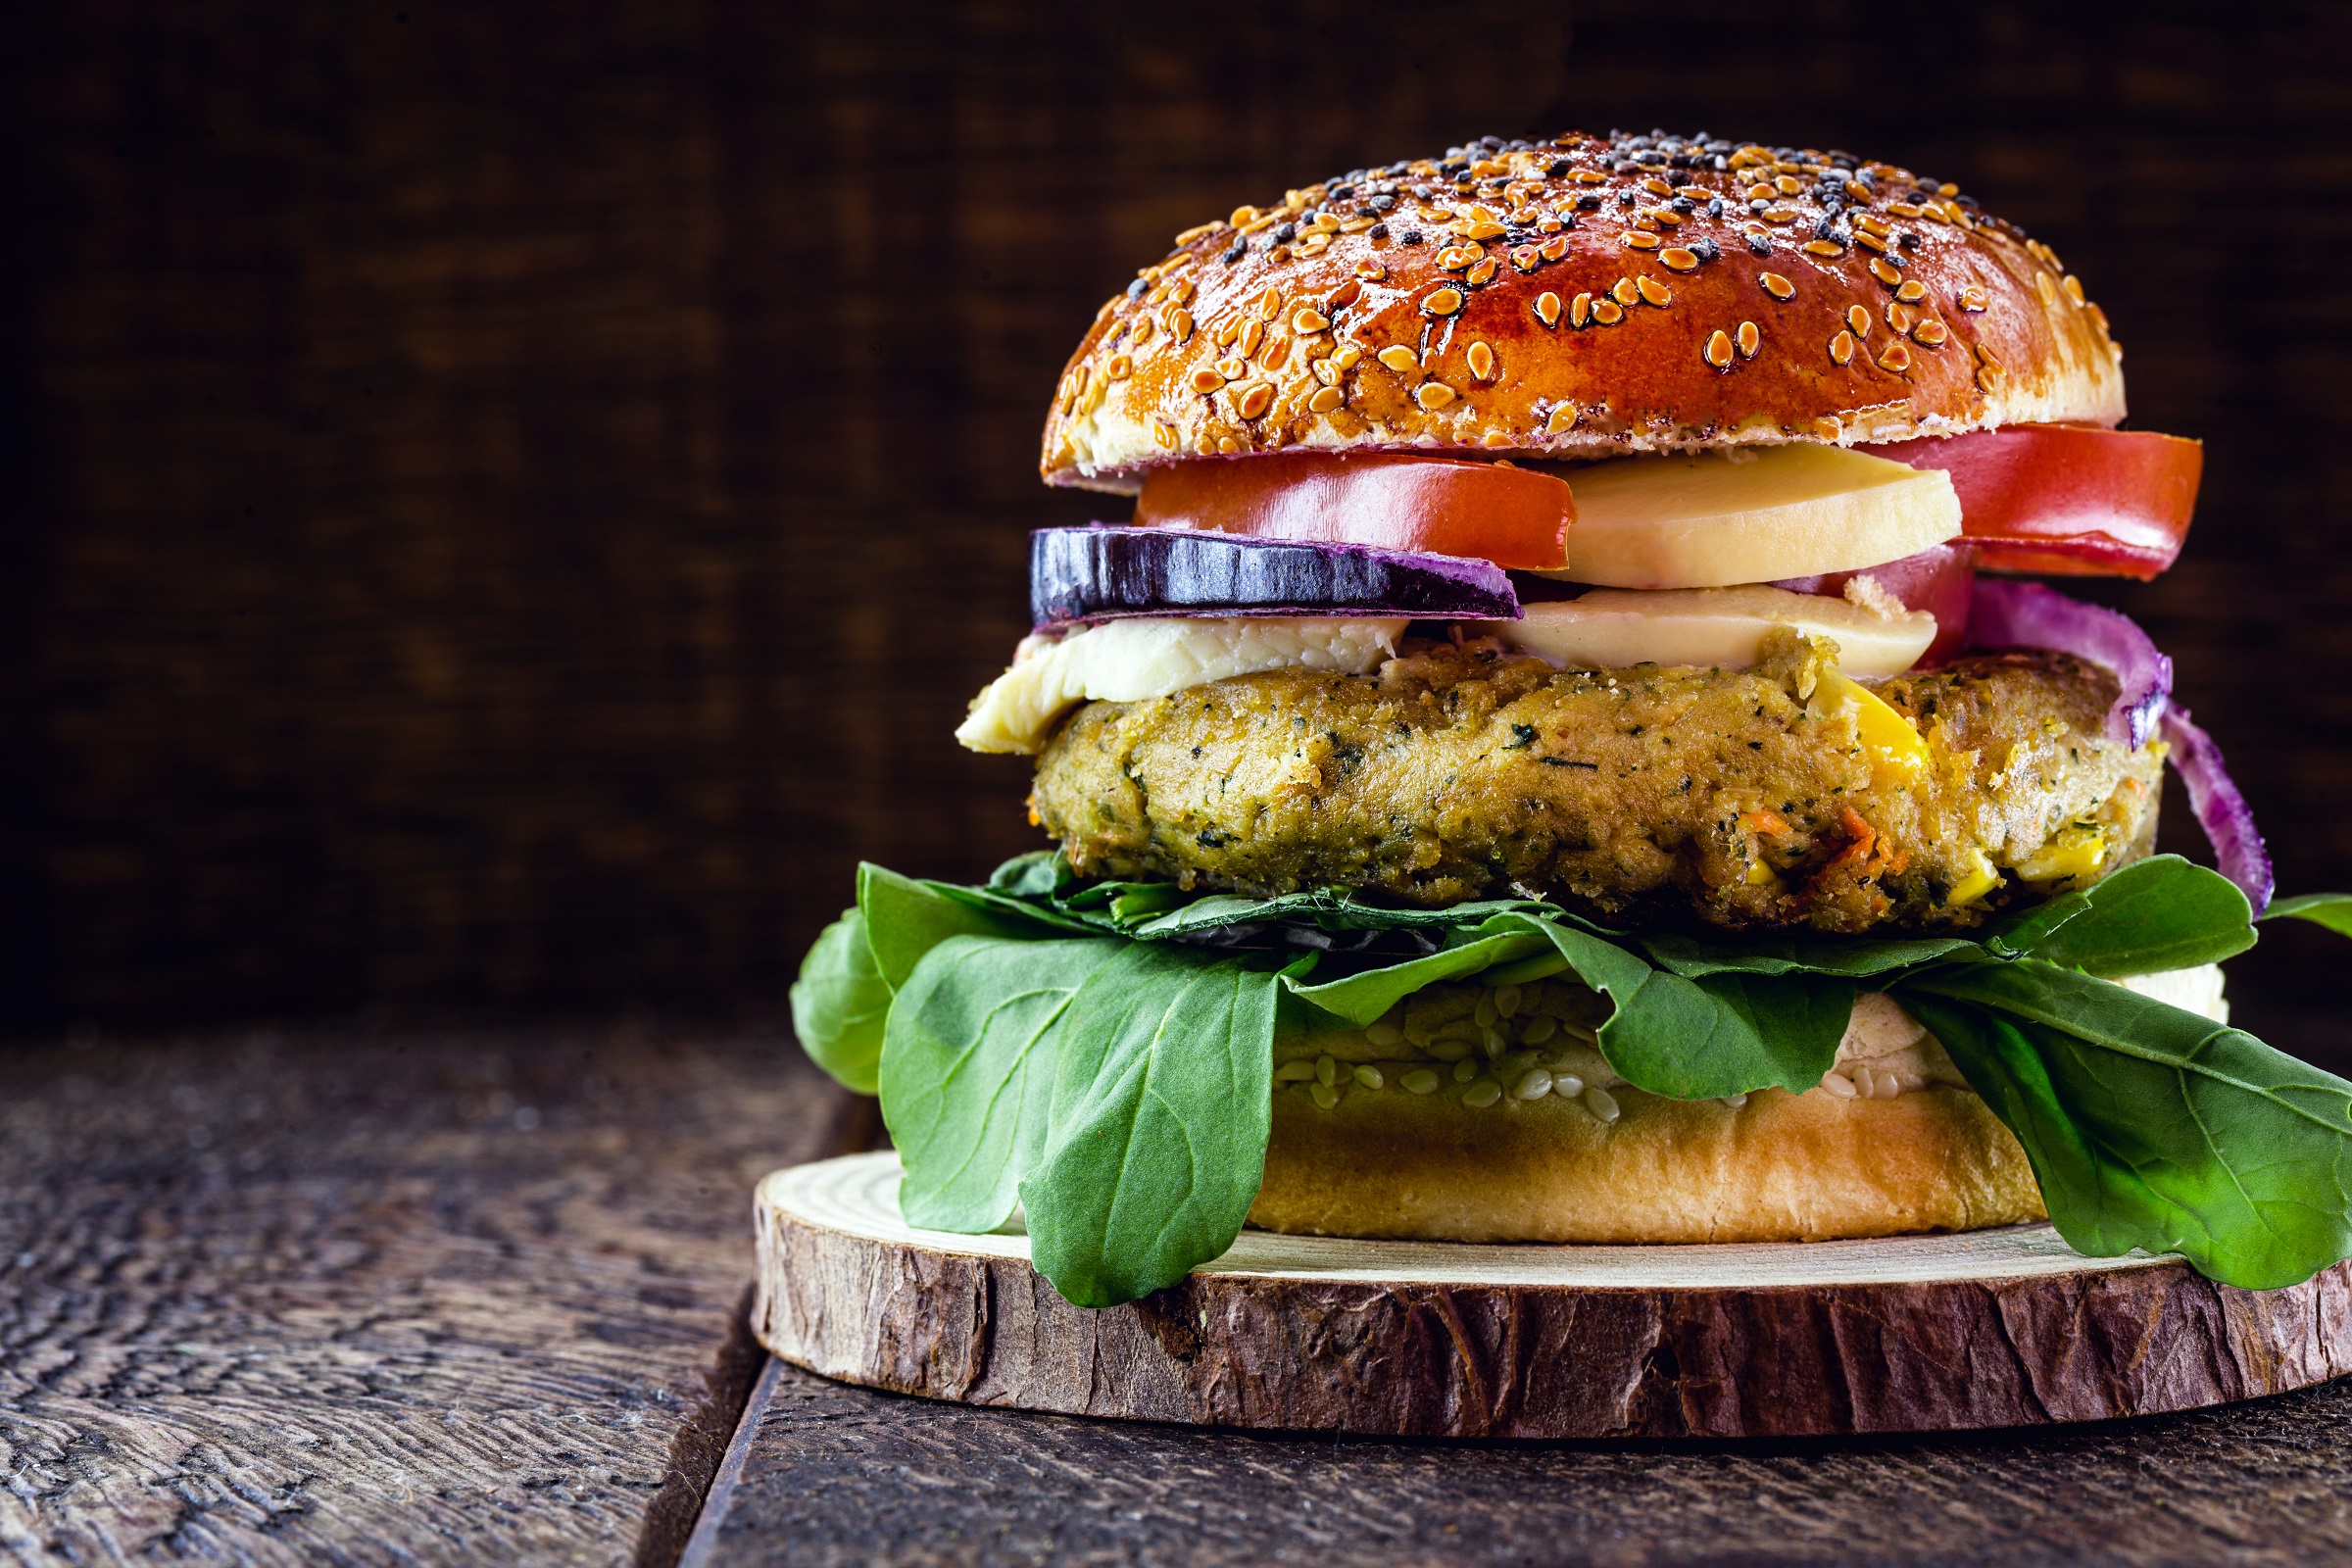 How to meet consumer demand for burger variety